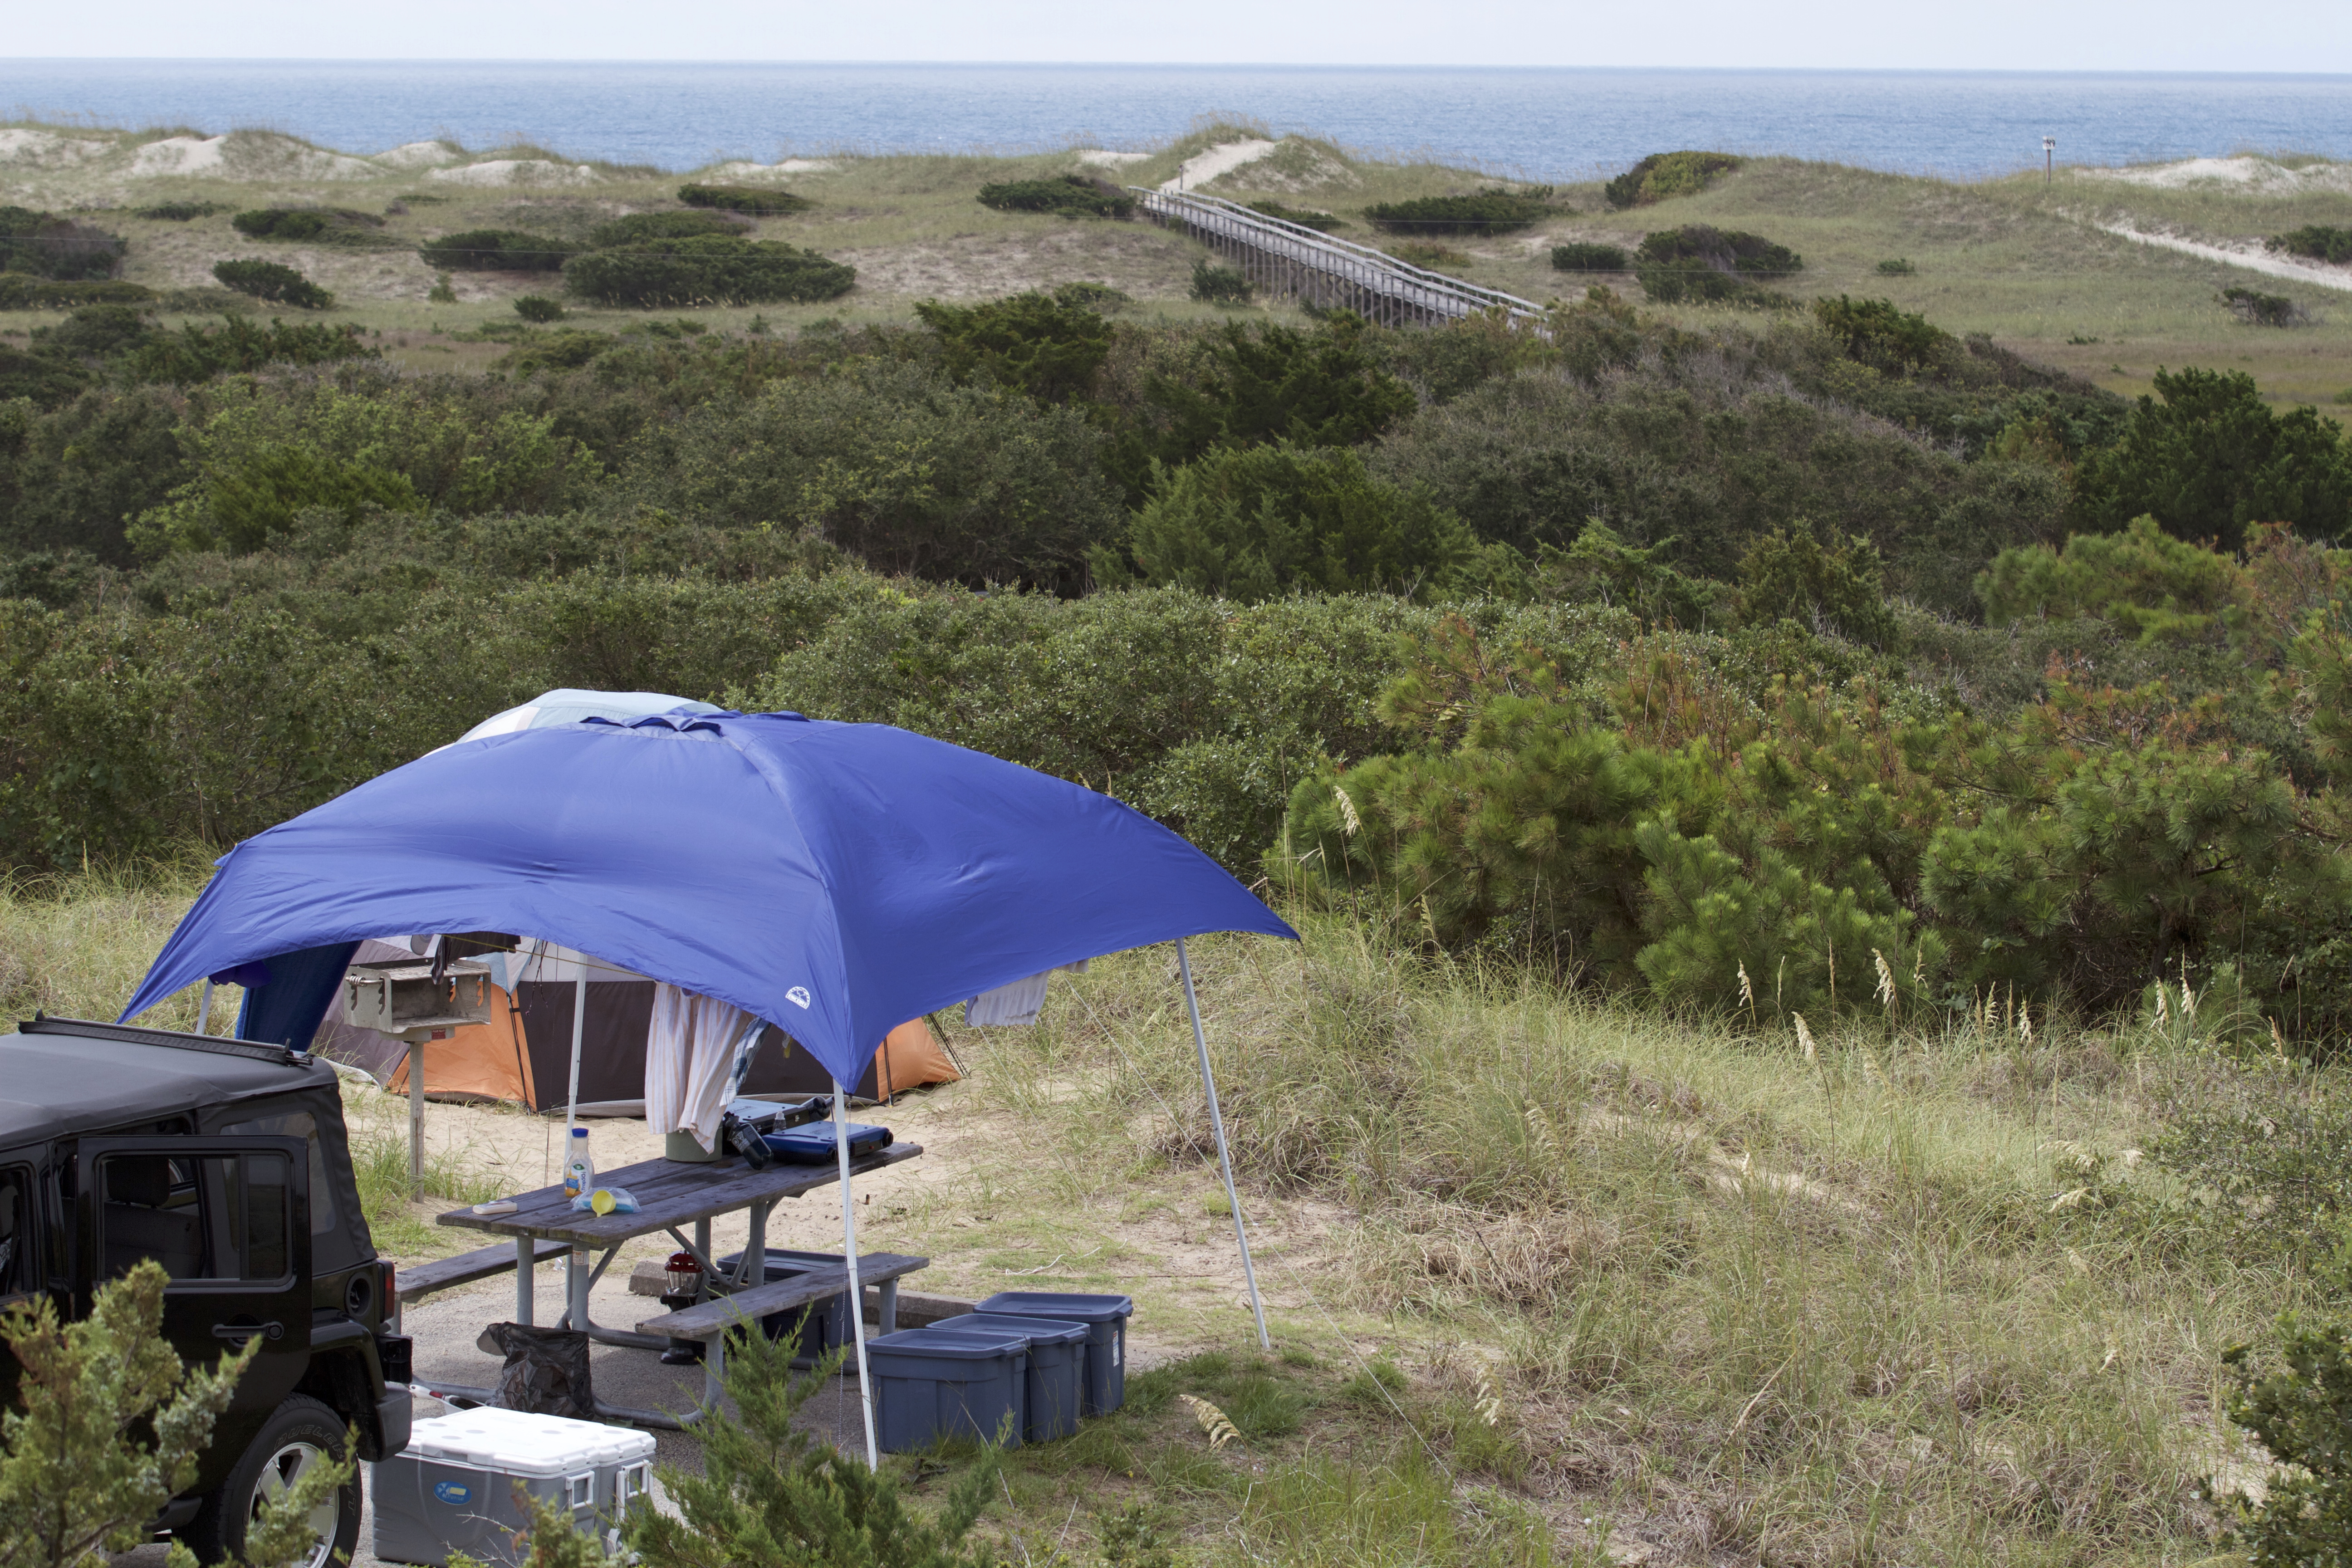 Canopy, tent, and vehicle at a camp site looking over the dune field at Frisco Campground.